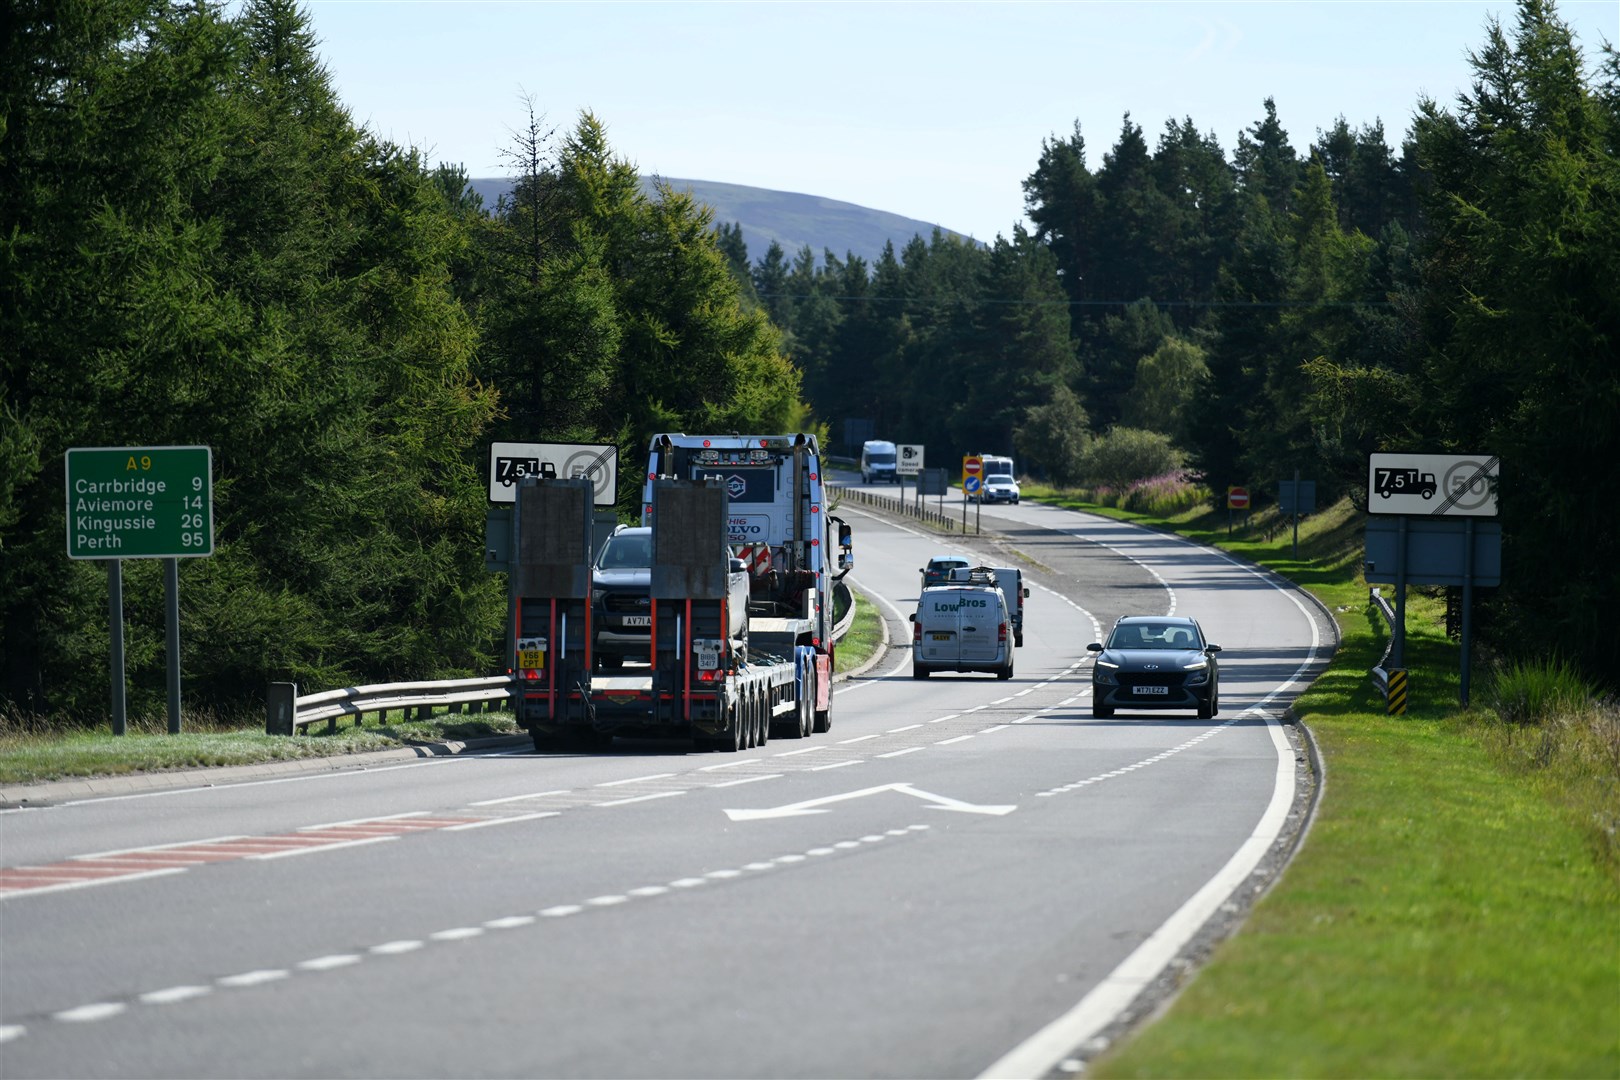 Full dualling of the A9 from Inverness to Perth is now promised to be completed by 2035.